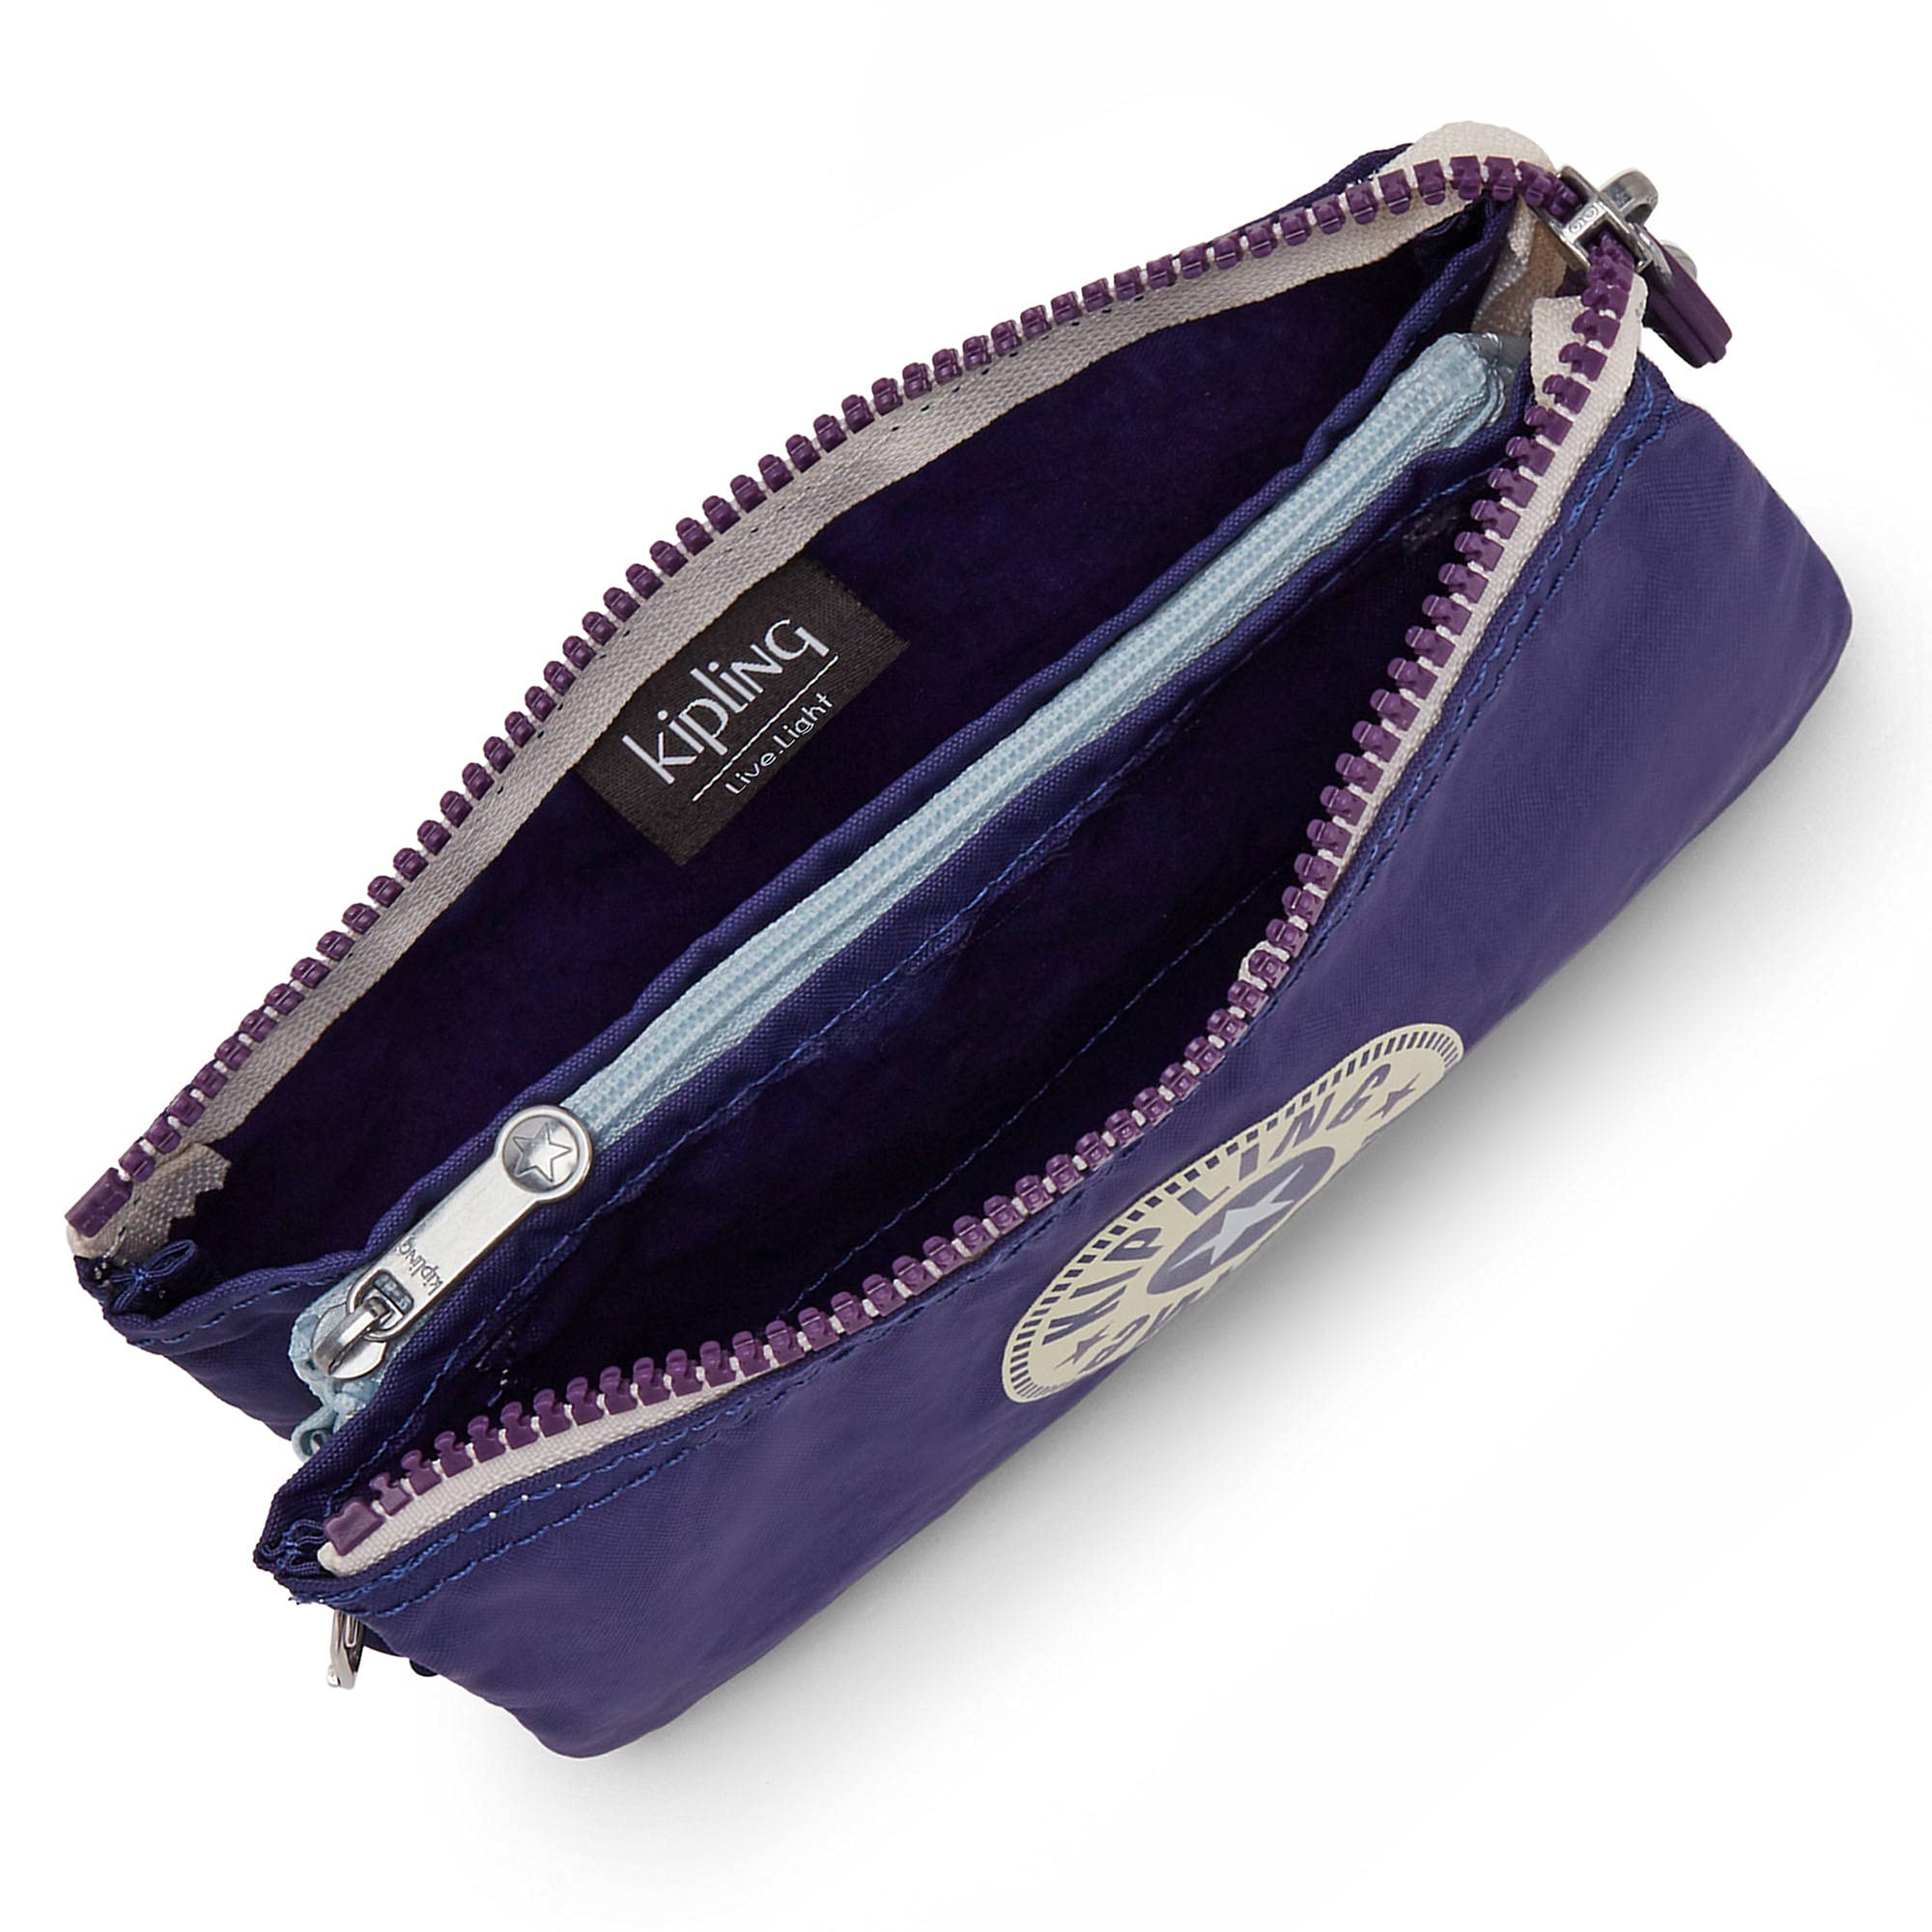 Kipling Creativity Extra-Large Cosmetic Pouch - ShopStyle Clutches